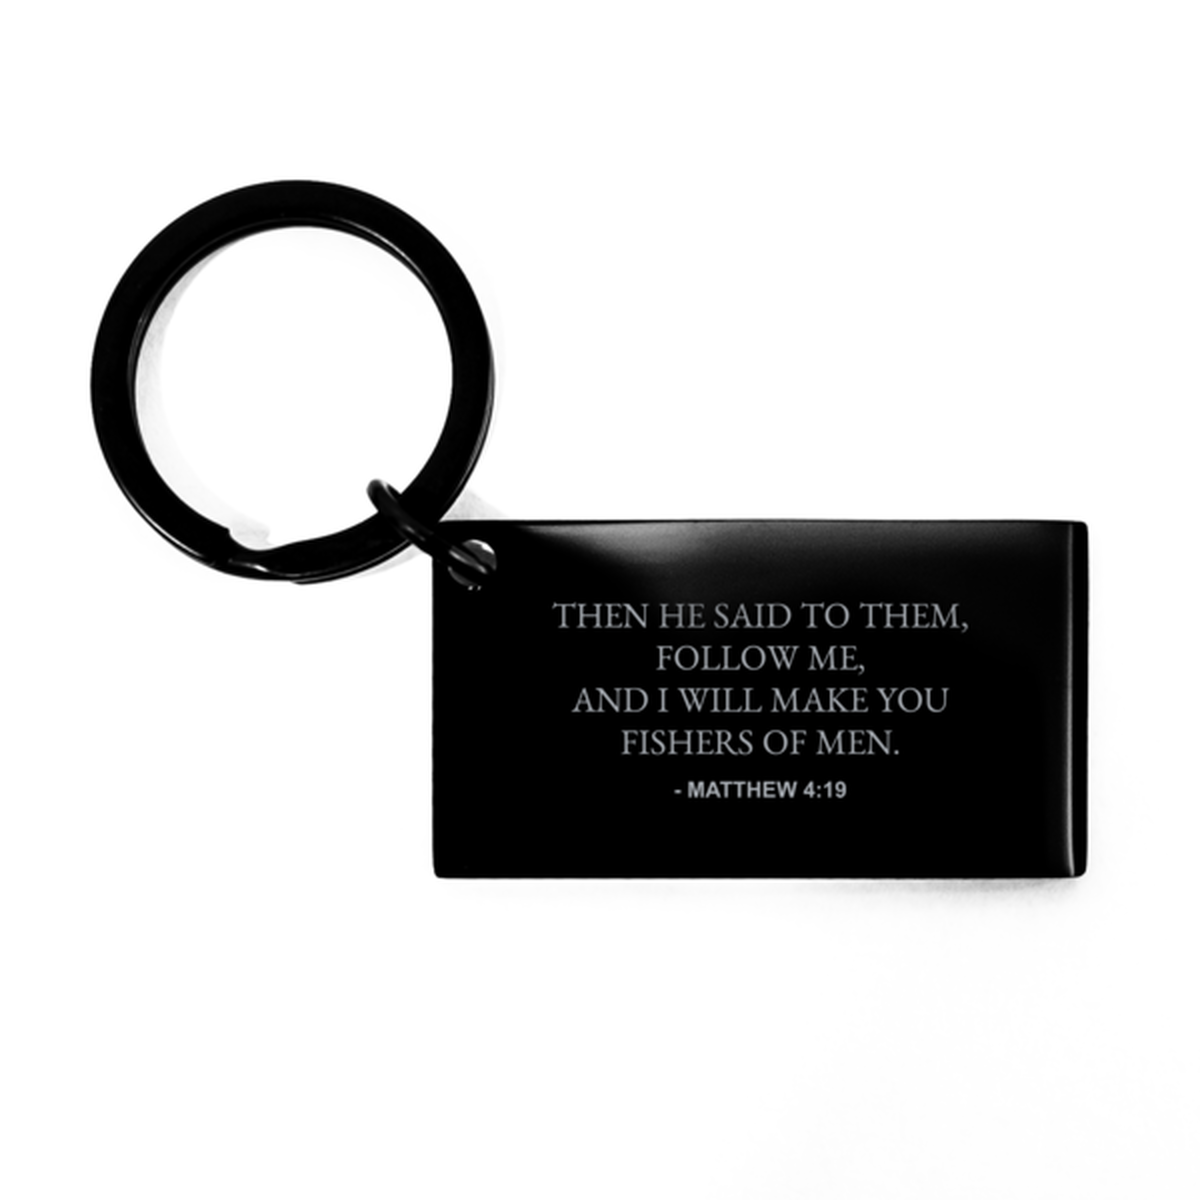 Bible Verse Black Keychain, Matthew 4:19 Then He Said To Them, Follow Me, And I Will, Christian Inspirational Key Ring Gifts For Men Women